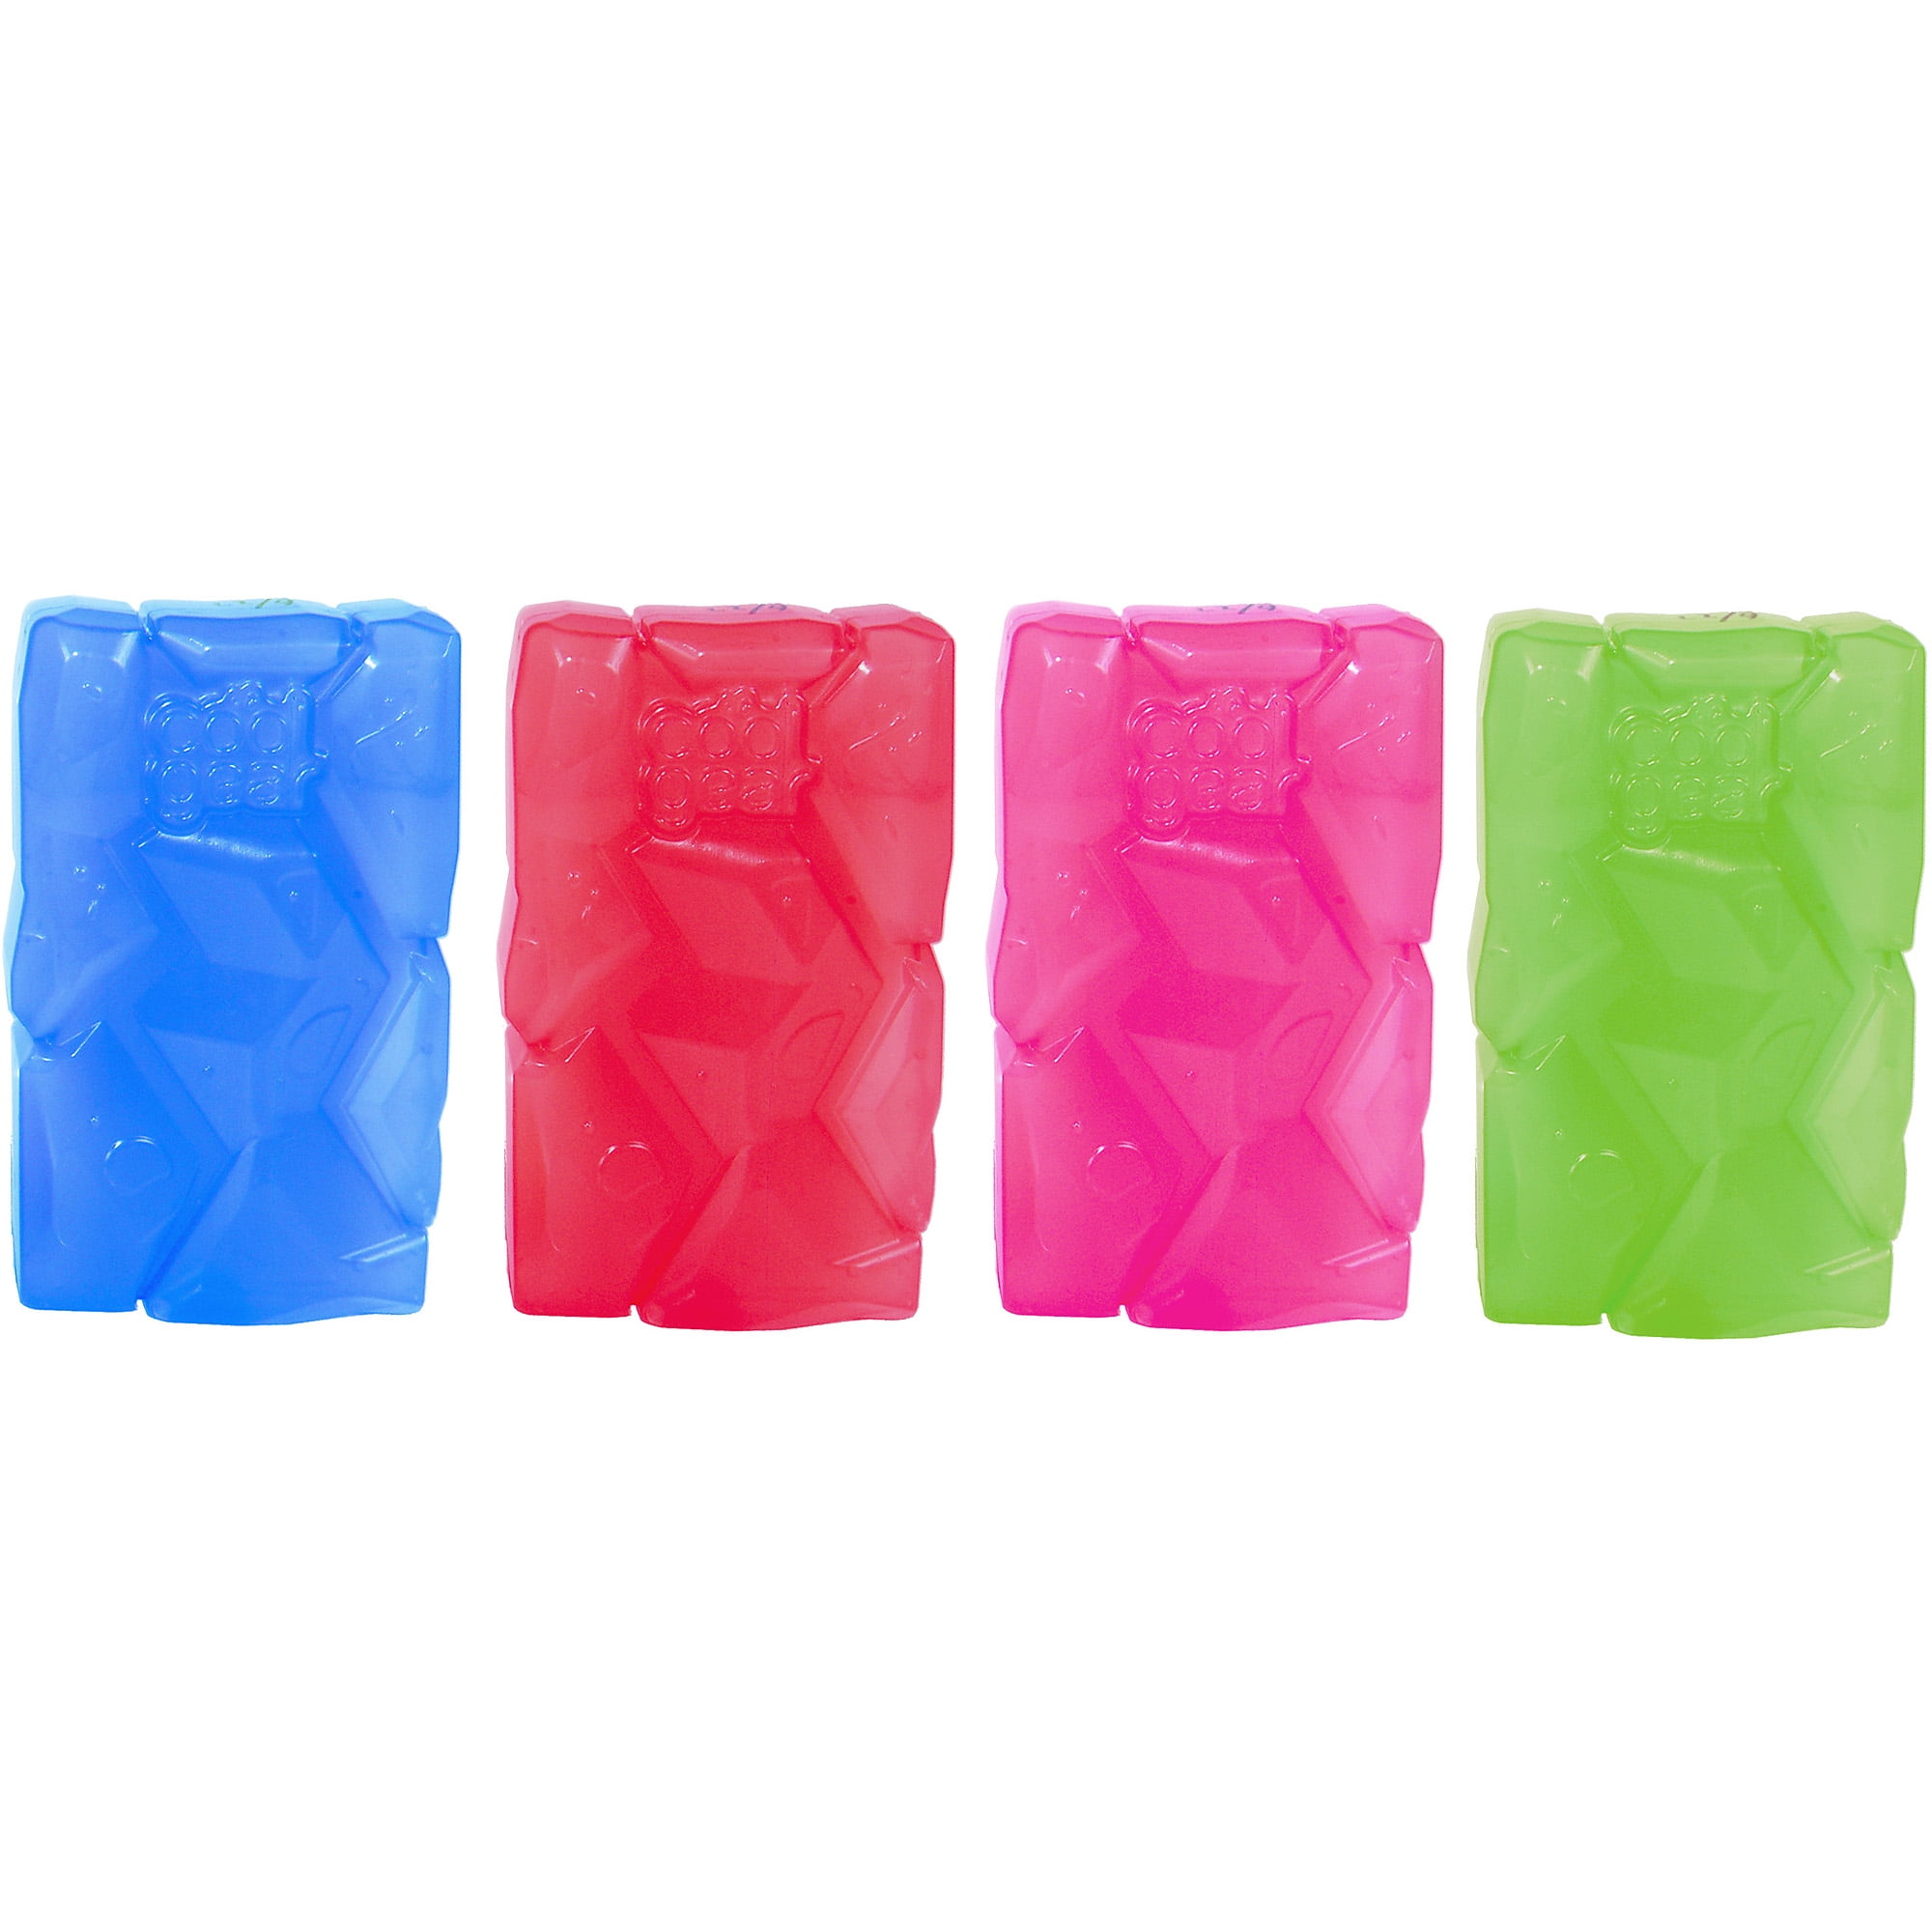 Staycool Dynamic Gear Reusable Ice Pack (6 Pack) for Lunch Box